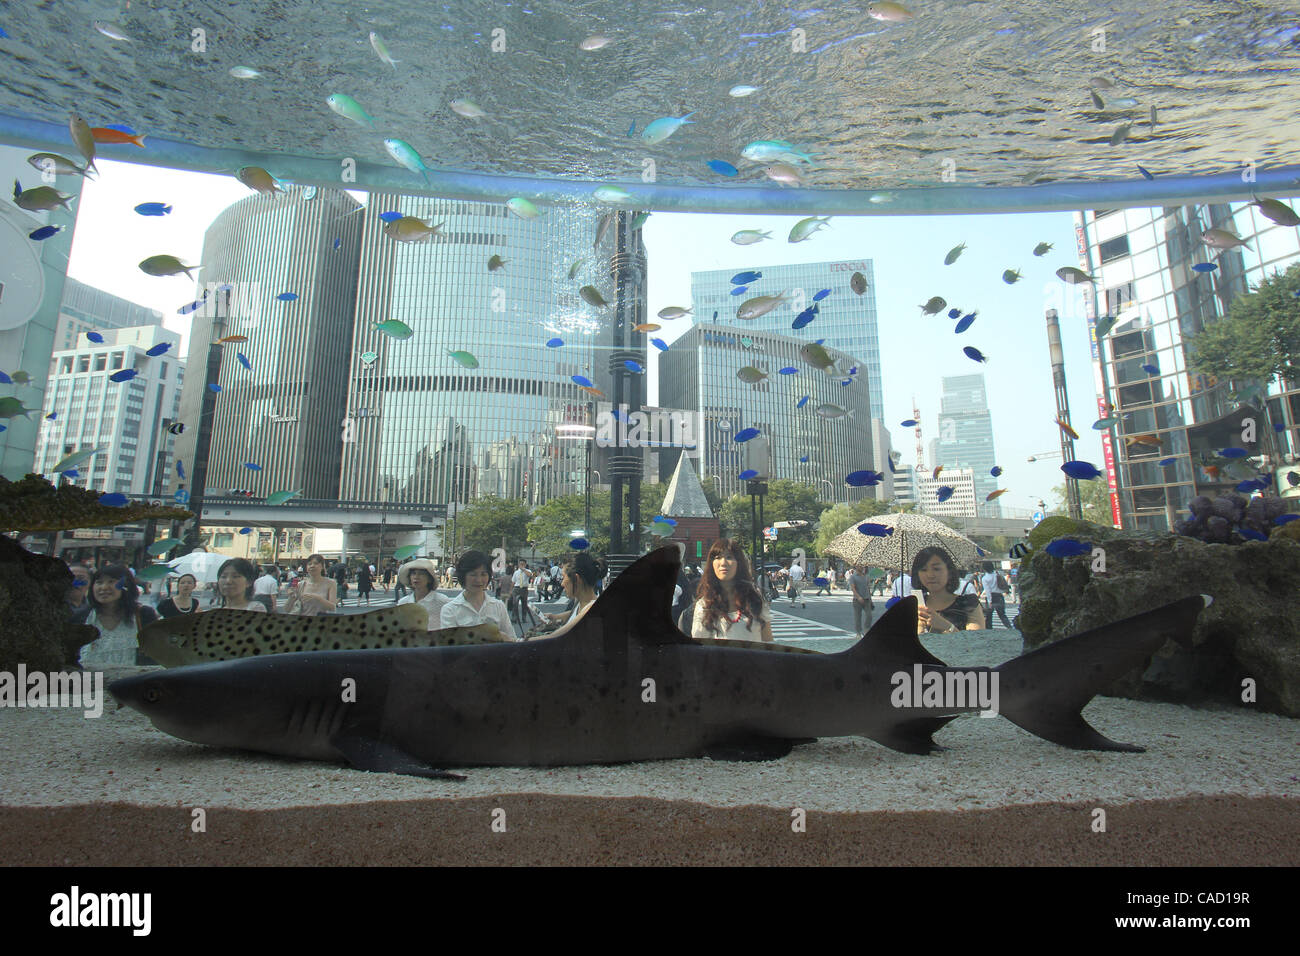 Jul 22, 2010 - Tokyo, Japan - Visitors enjoy watching the fish from the Southern Japan, Okinawa at Sony Building in Tokyo, Japan. As a part of the 43rd Sony Aquarium, fish from Okinawa is on display in tank and Kuroshio Current and Okinawa Churaumi Aquarium are projected on the giant 200 inch 3D scr Stock Photo